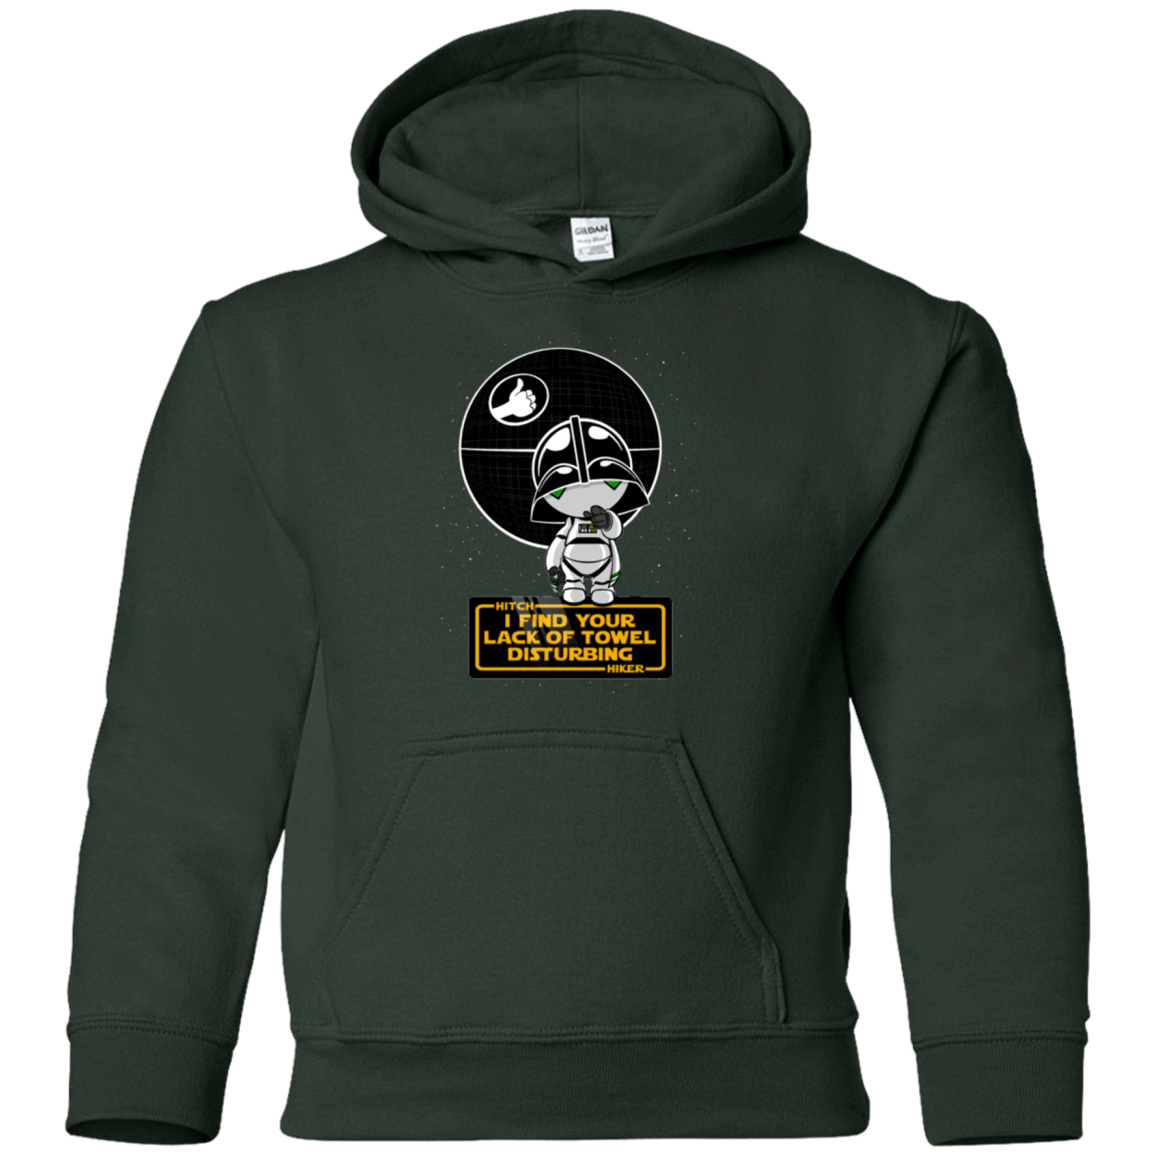 Sweatshirts Forest Green / YS A Powerful Ally Youth Hoodie